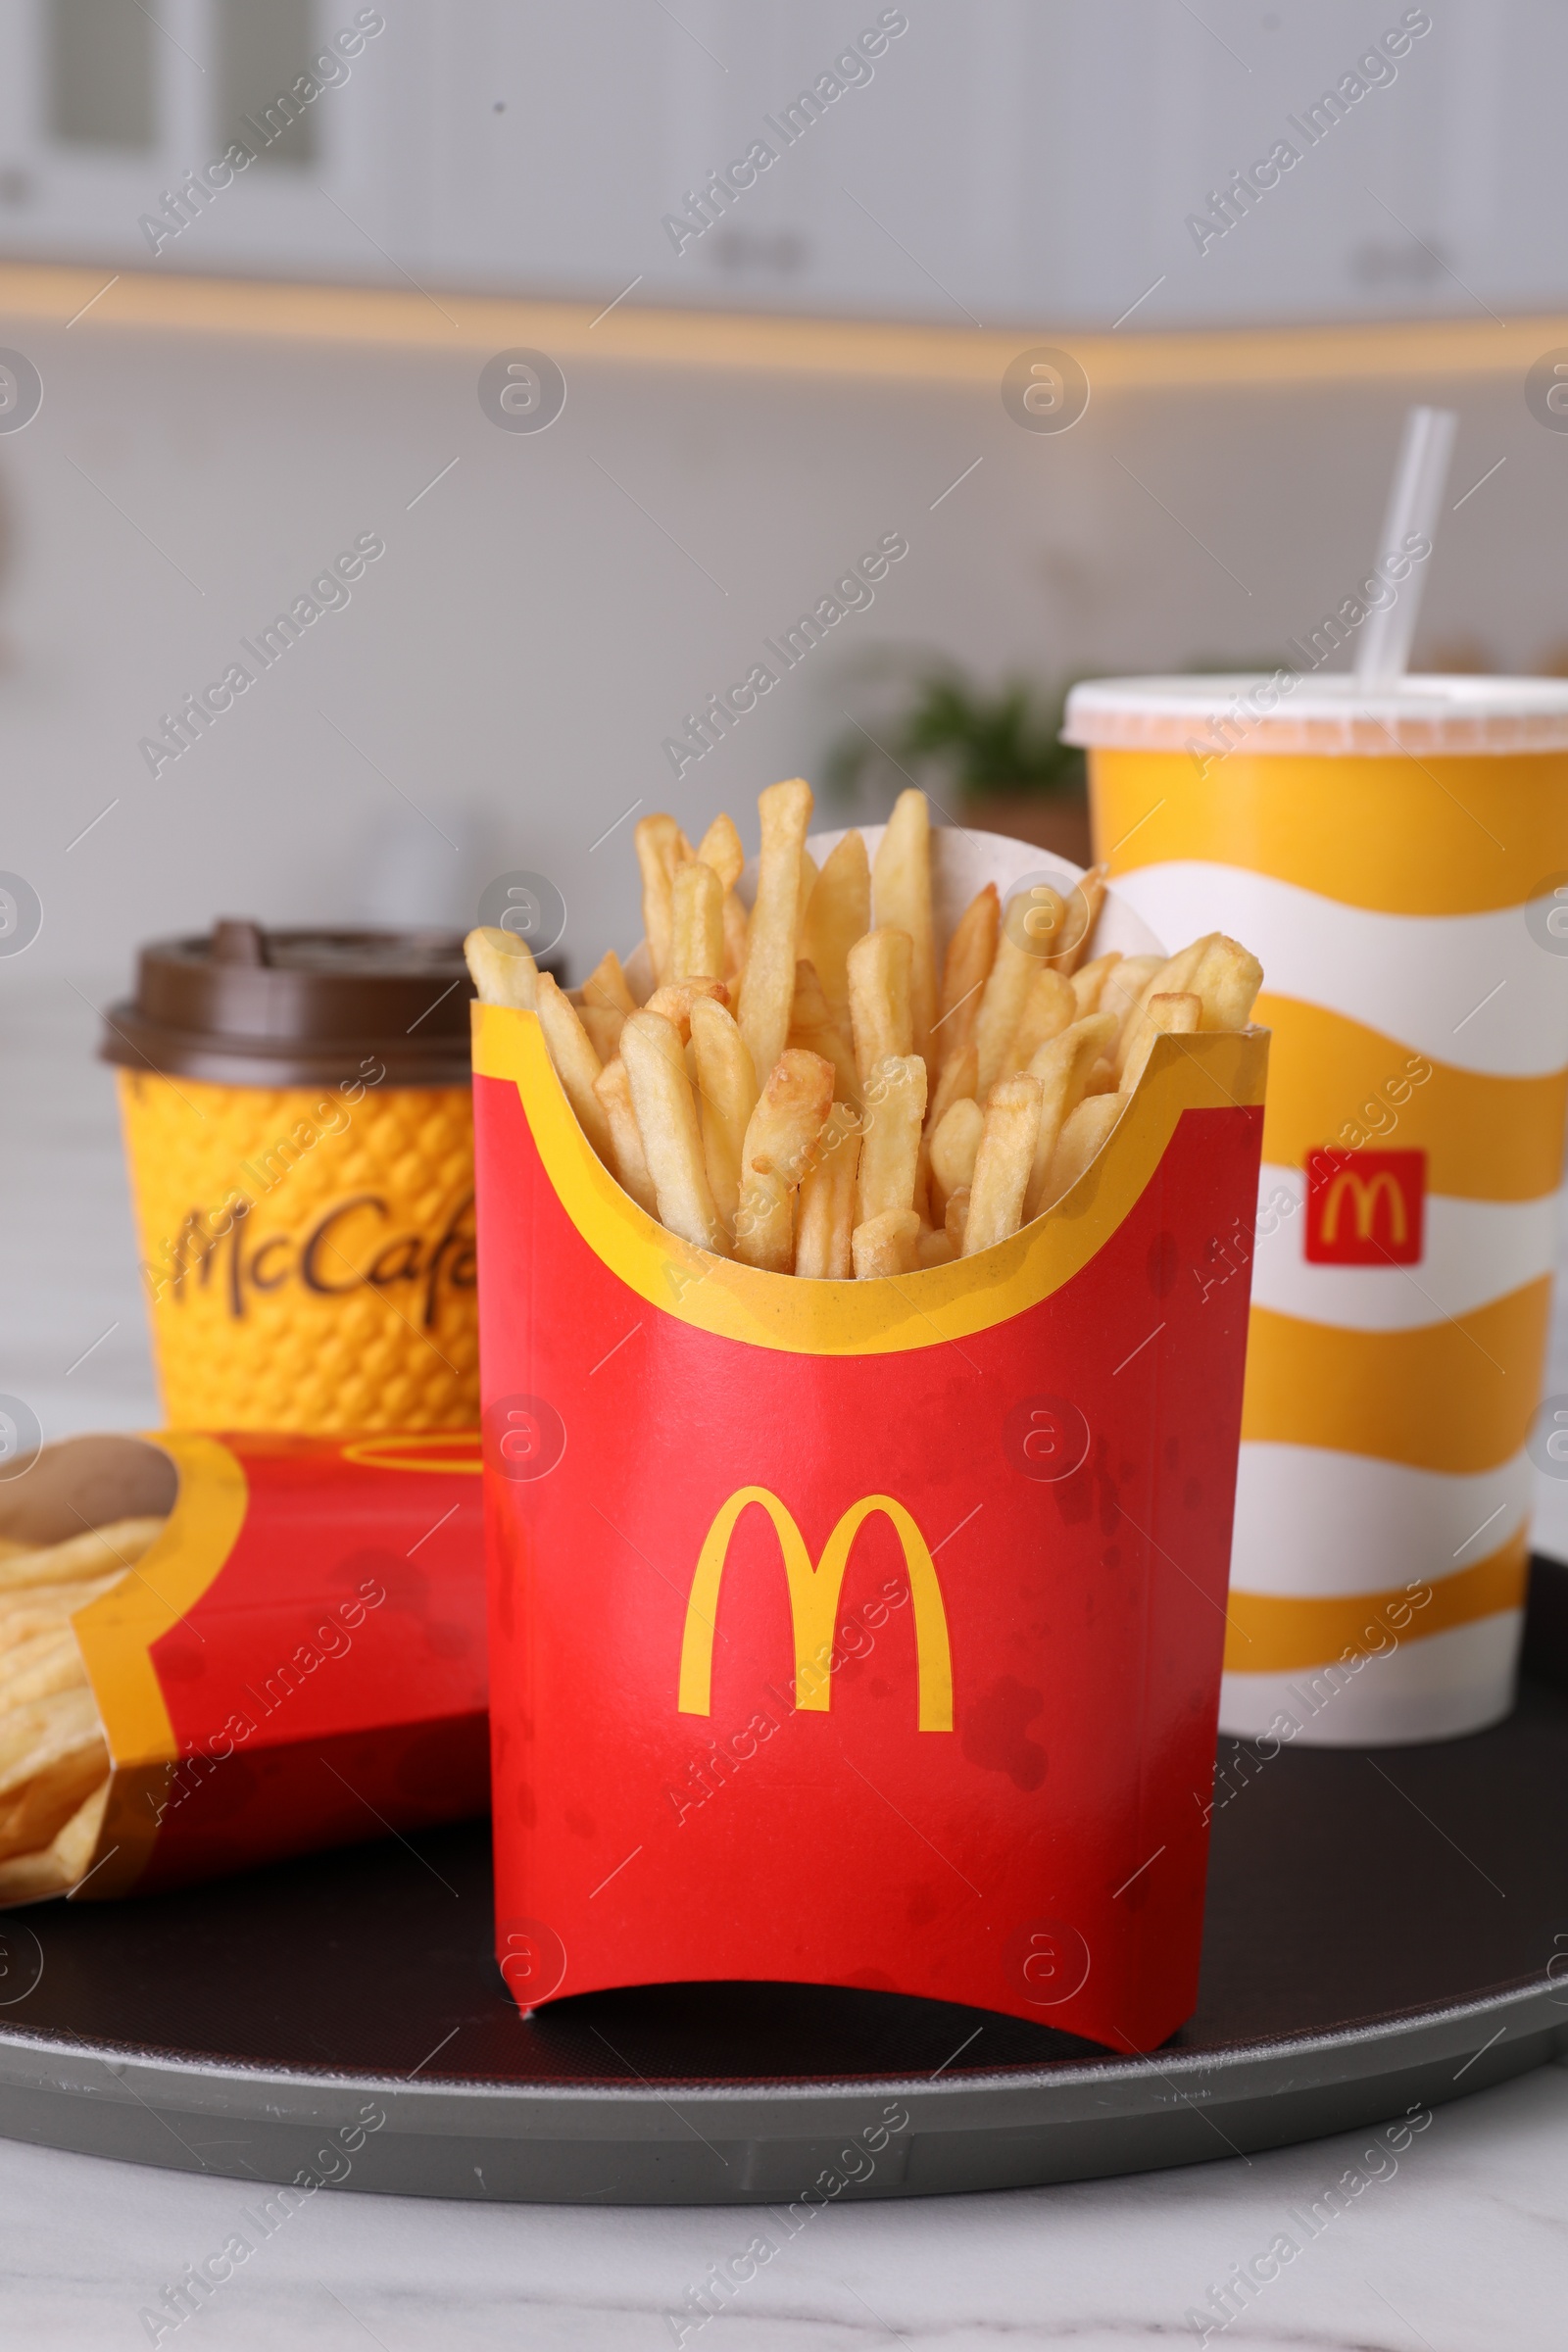 Photo of MYKOLAIV, UKRAINE - AUGUST 12, 2021: Two big portions of McDonald's French fries and drinks on marble table in kitchen